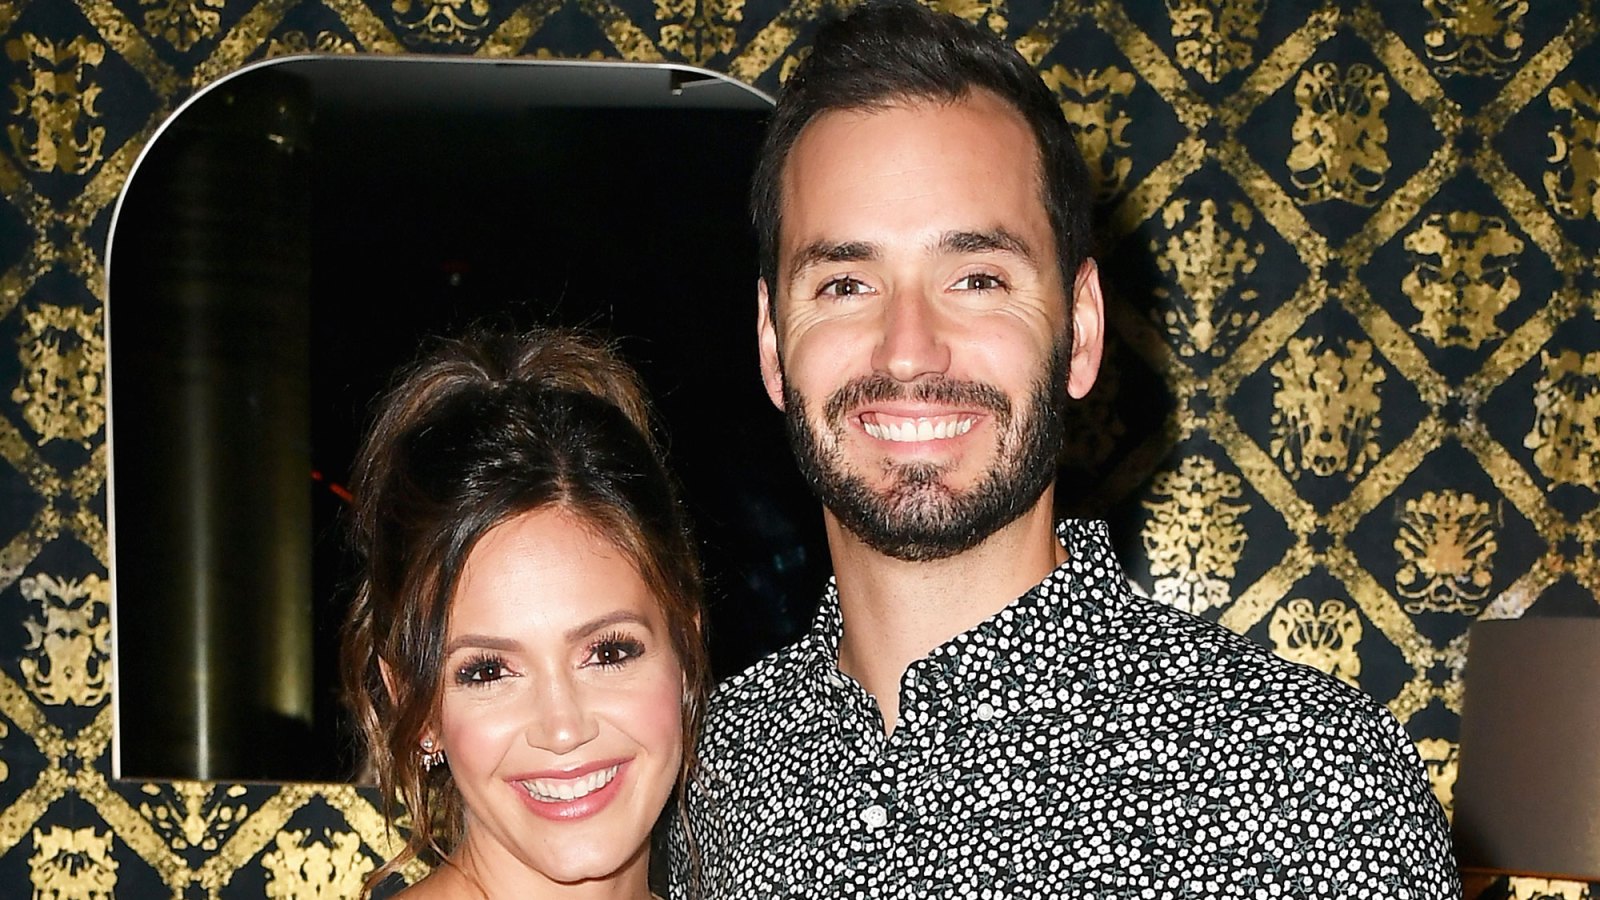 Desiree Hartsock and Chris Siegfried Watched the Sunrise as She Delivered Son Zander at Home